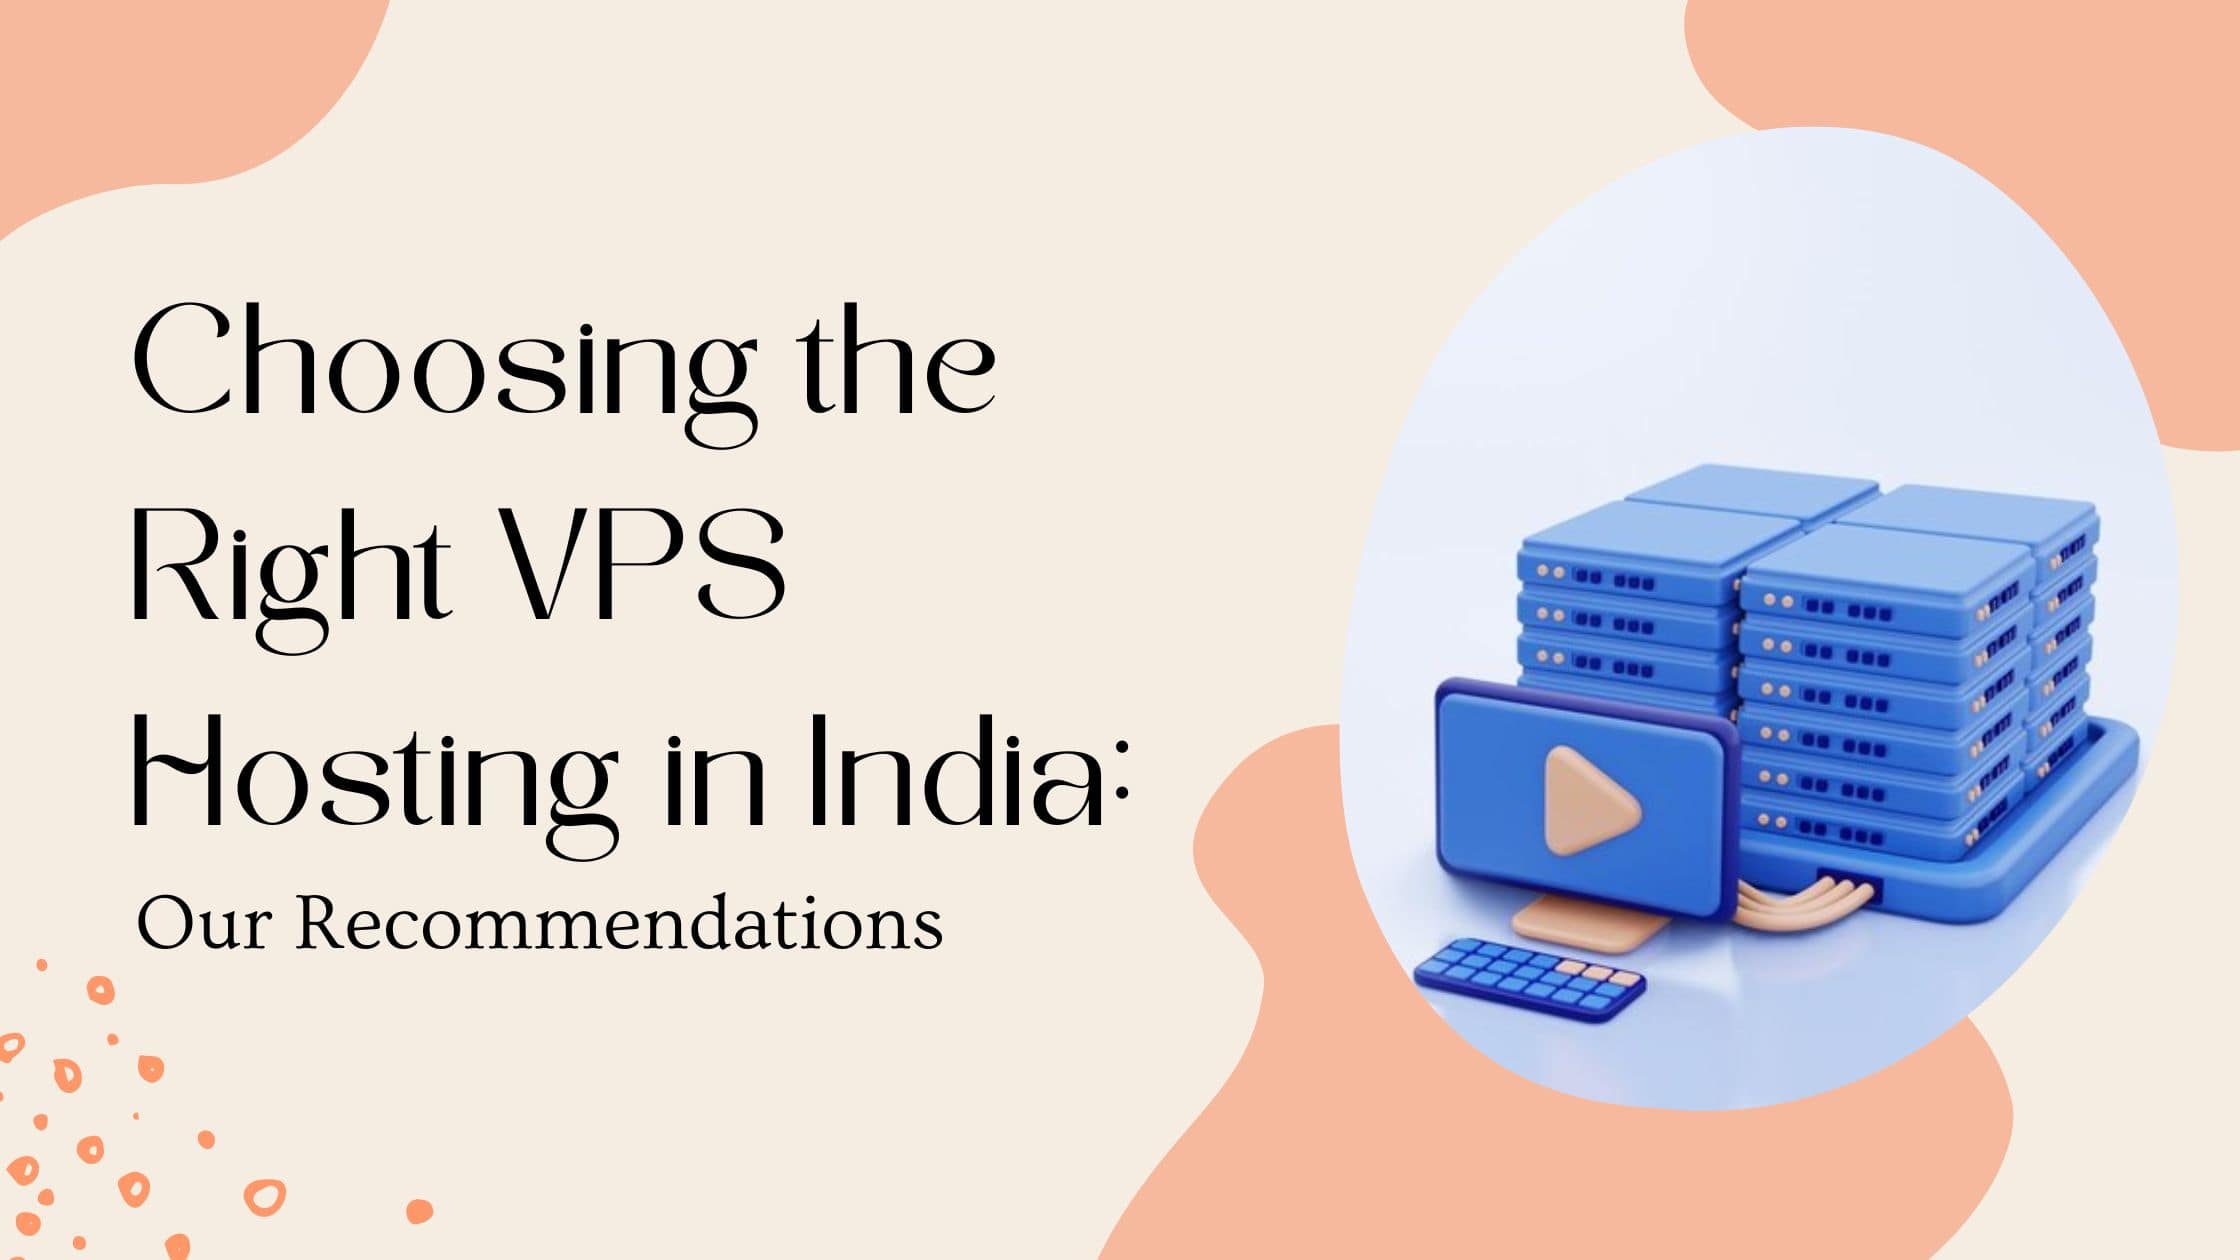 Choosing the Right VPS Hosting in India Our Recommendations